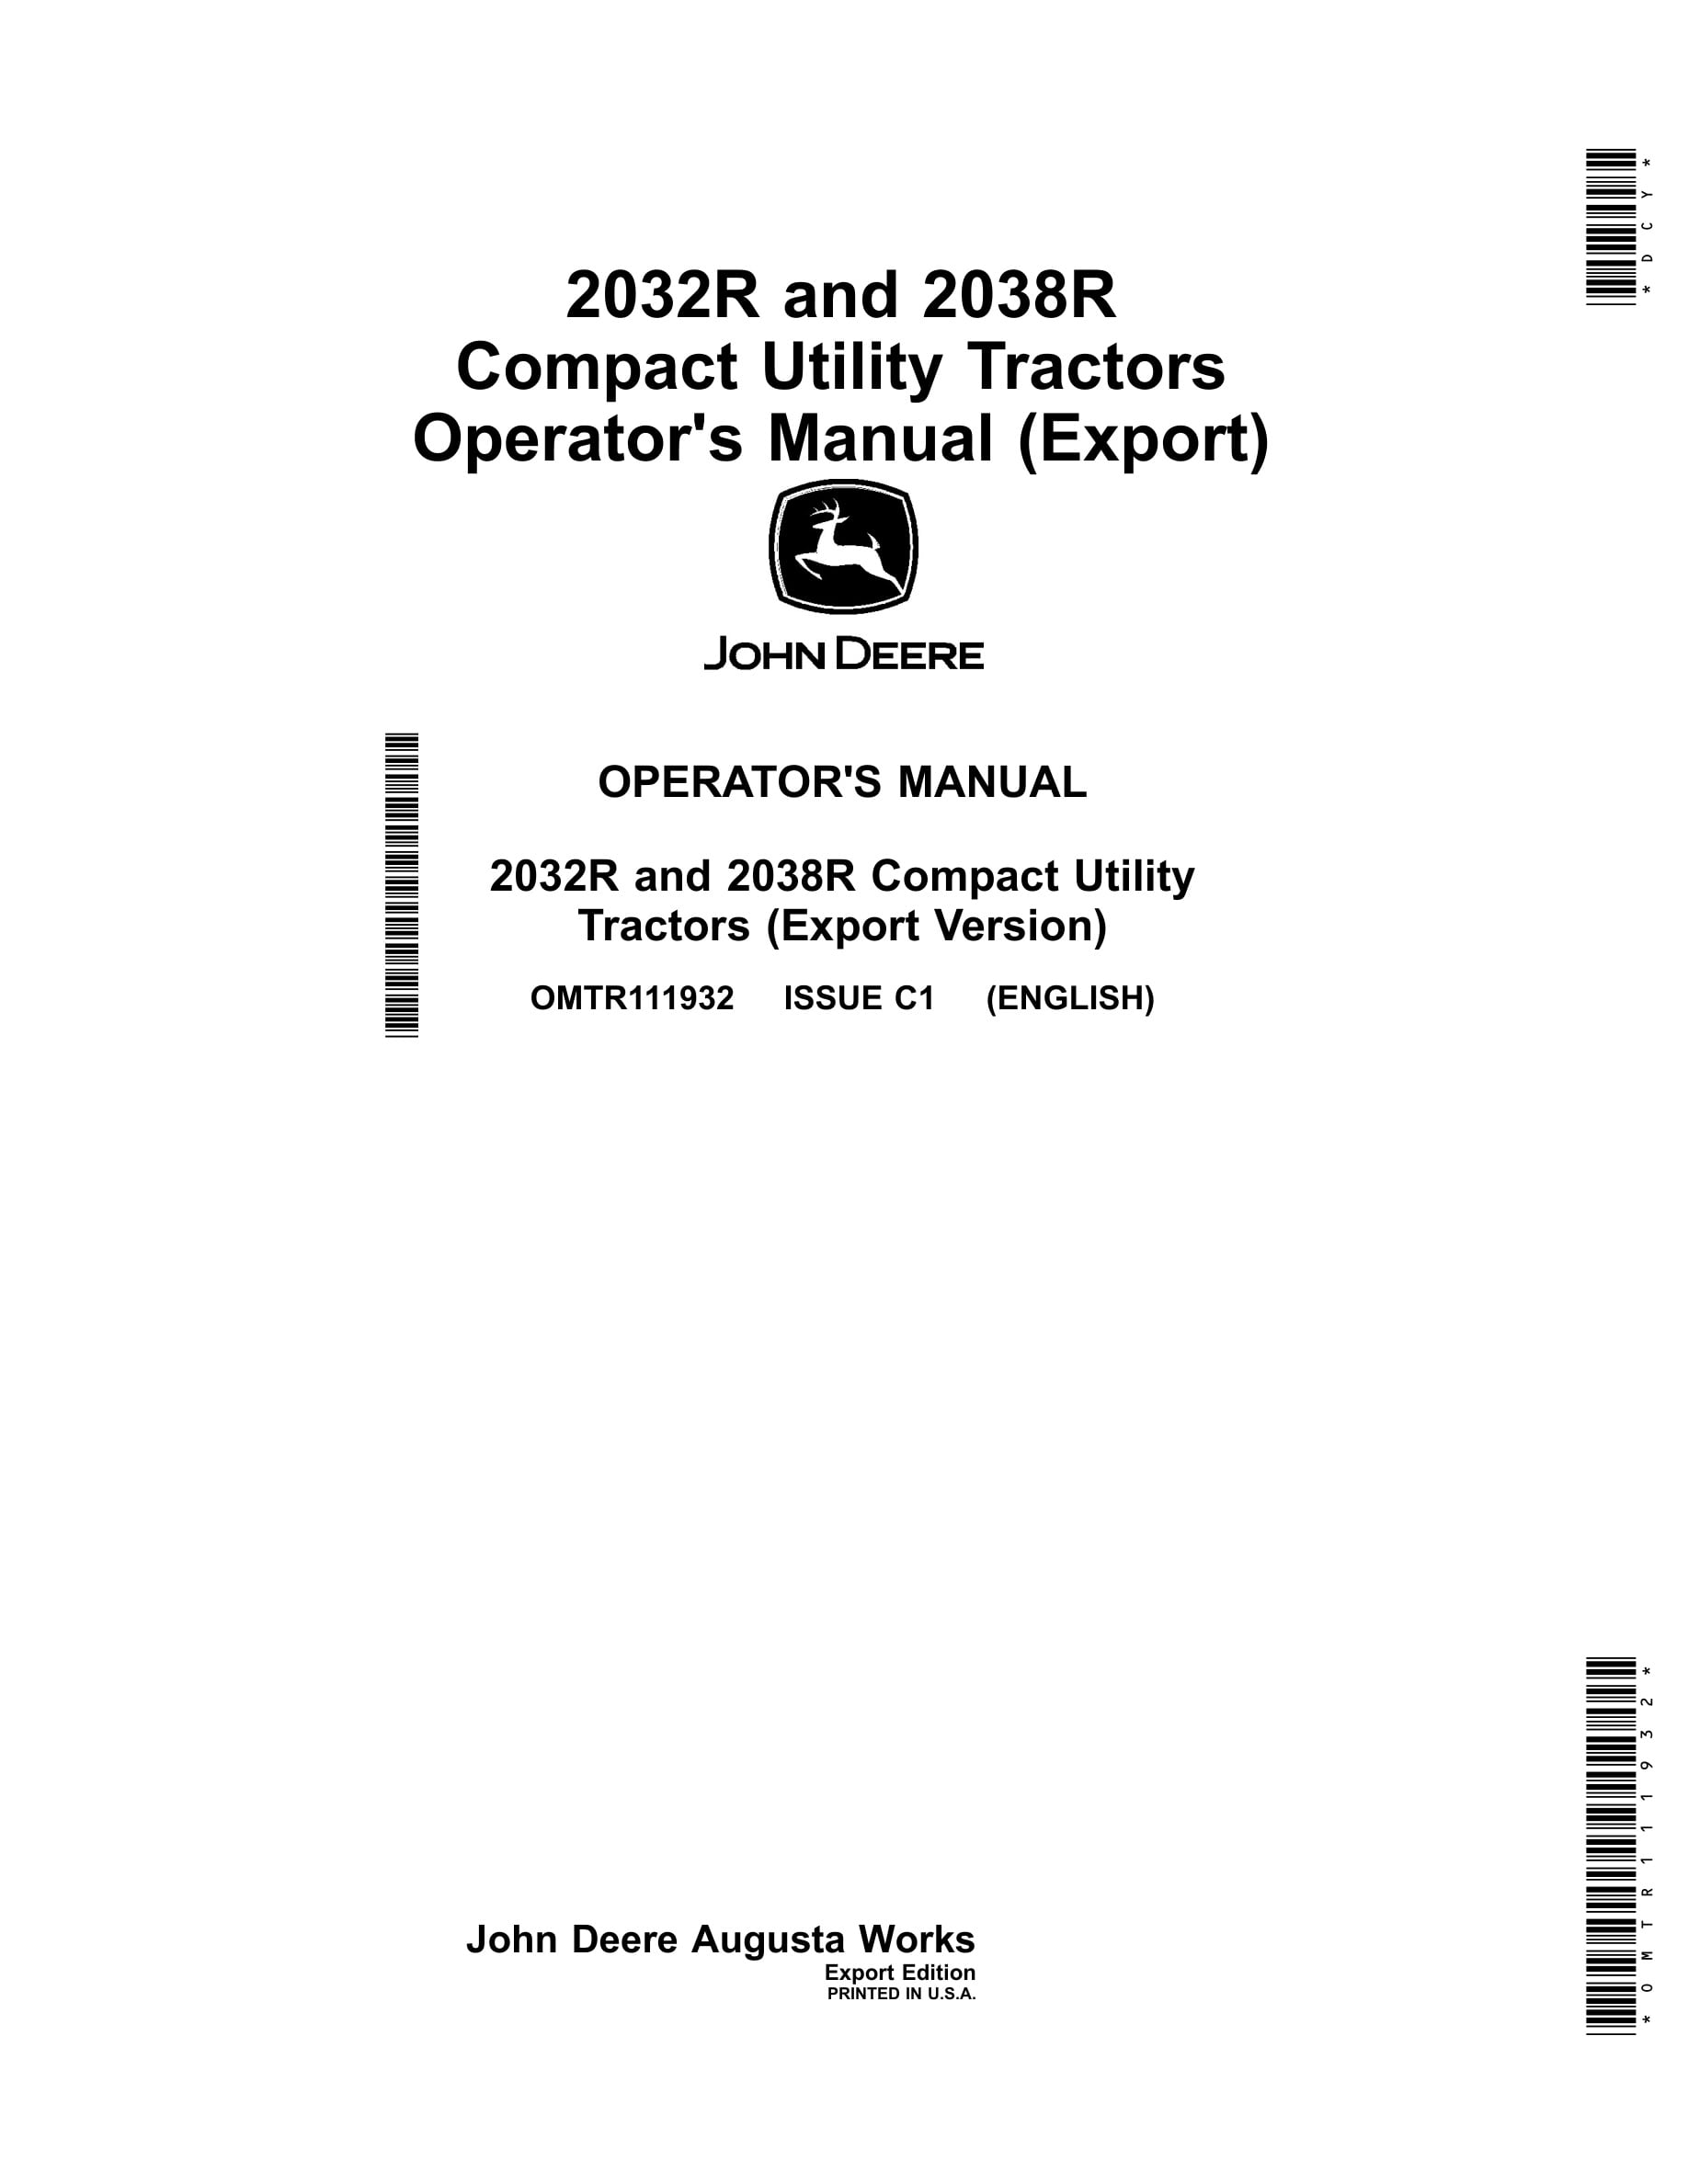 John Deere 2032r And 2038r Compact Utility Tractors Operator Manuals OMTR111932-1